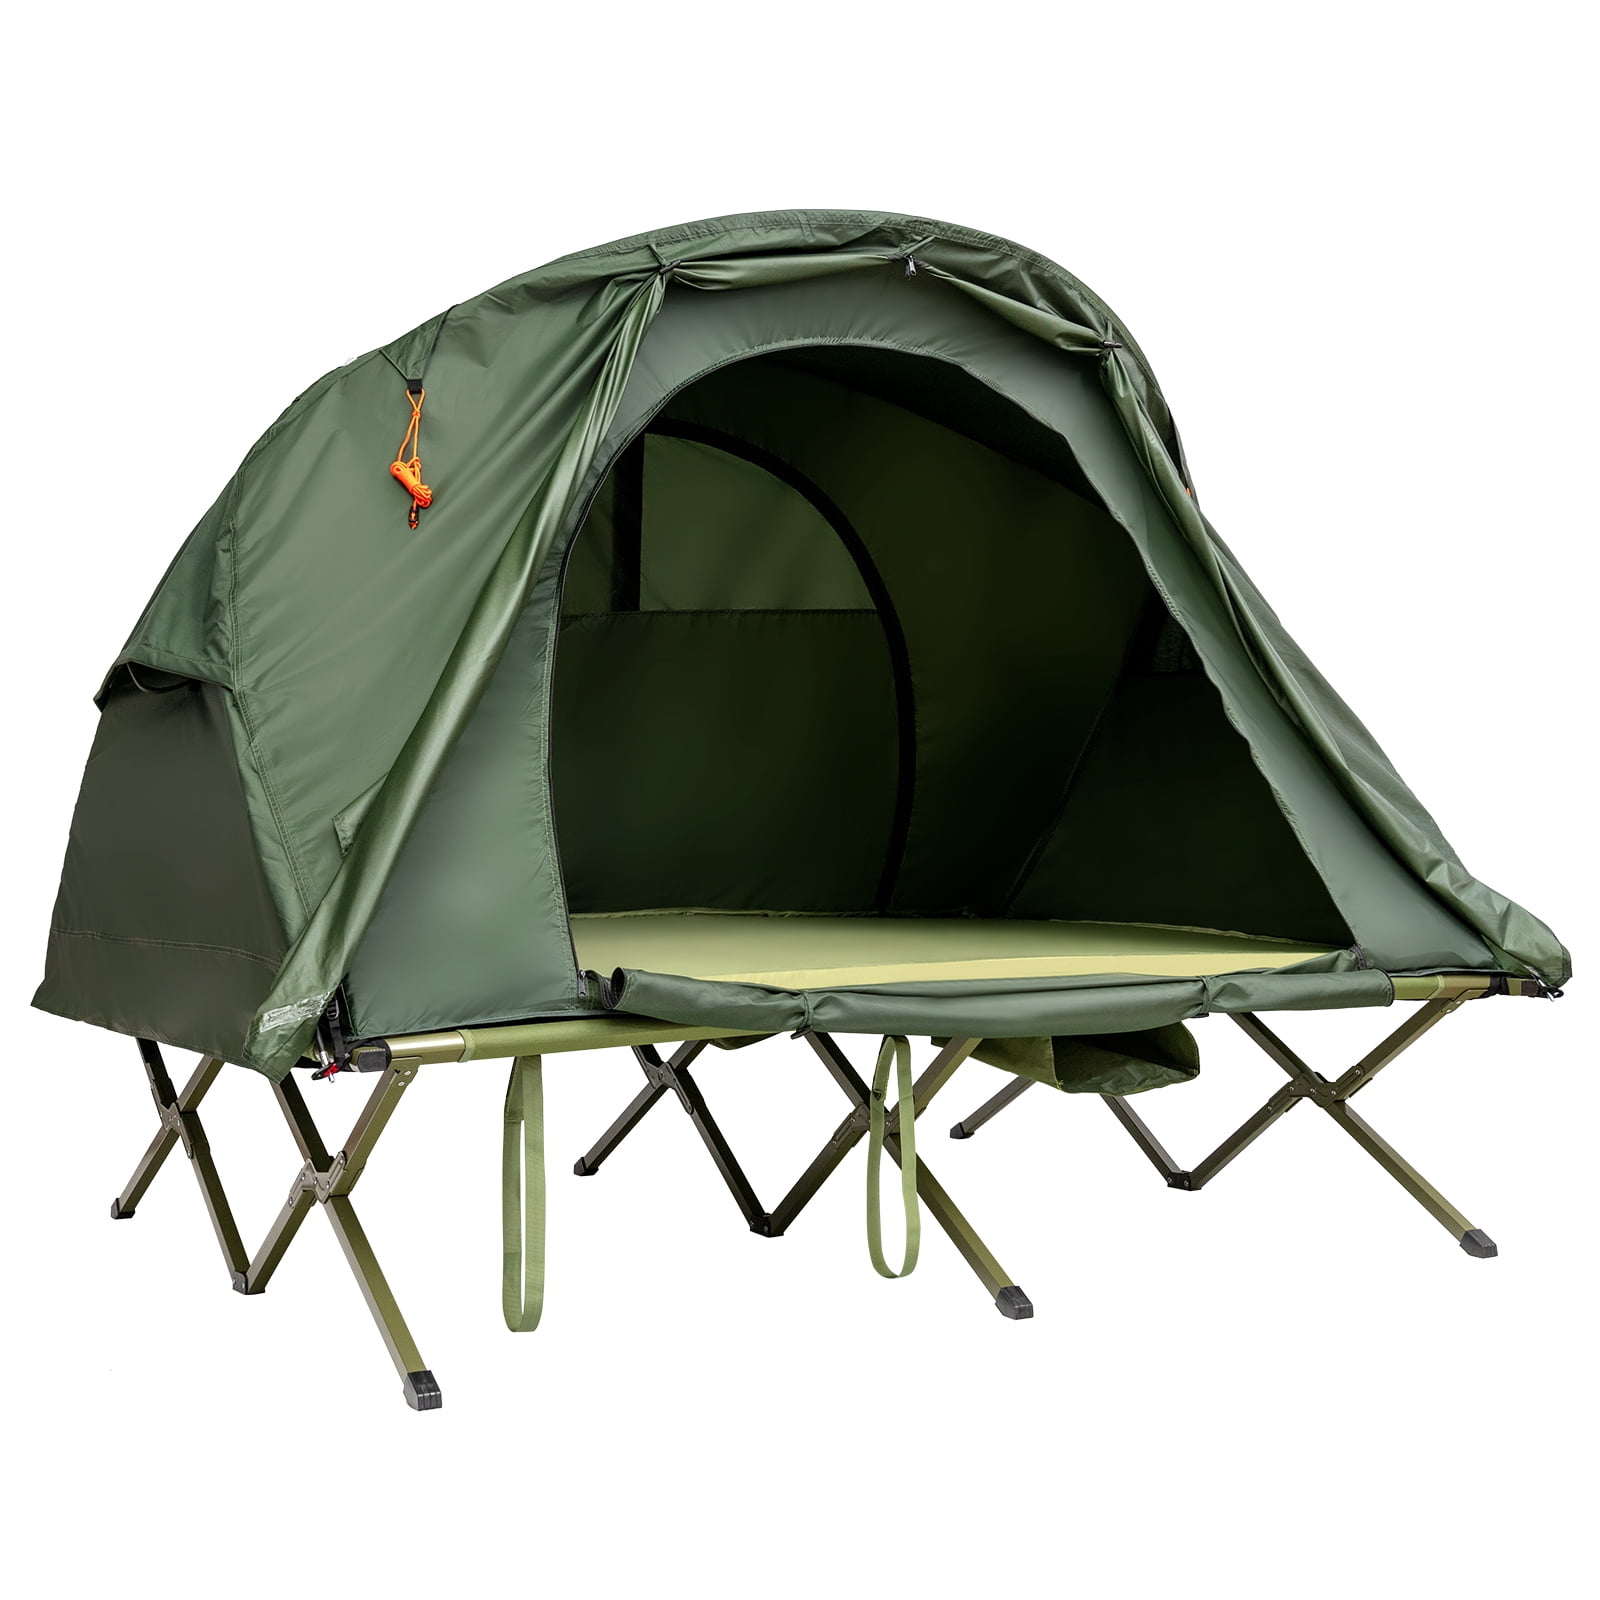 Gymax 1-Person Outdoor Camping Tent Cot Elevated Compact Tent Set 